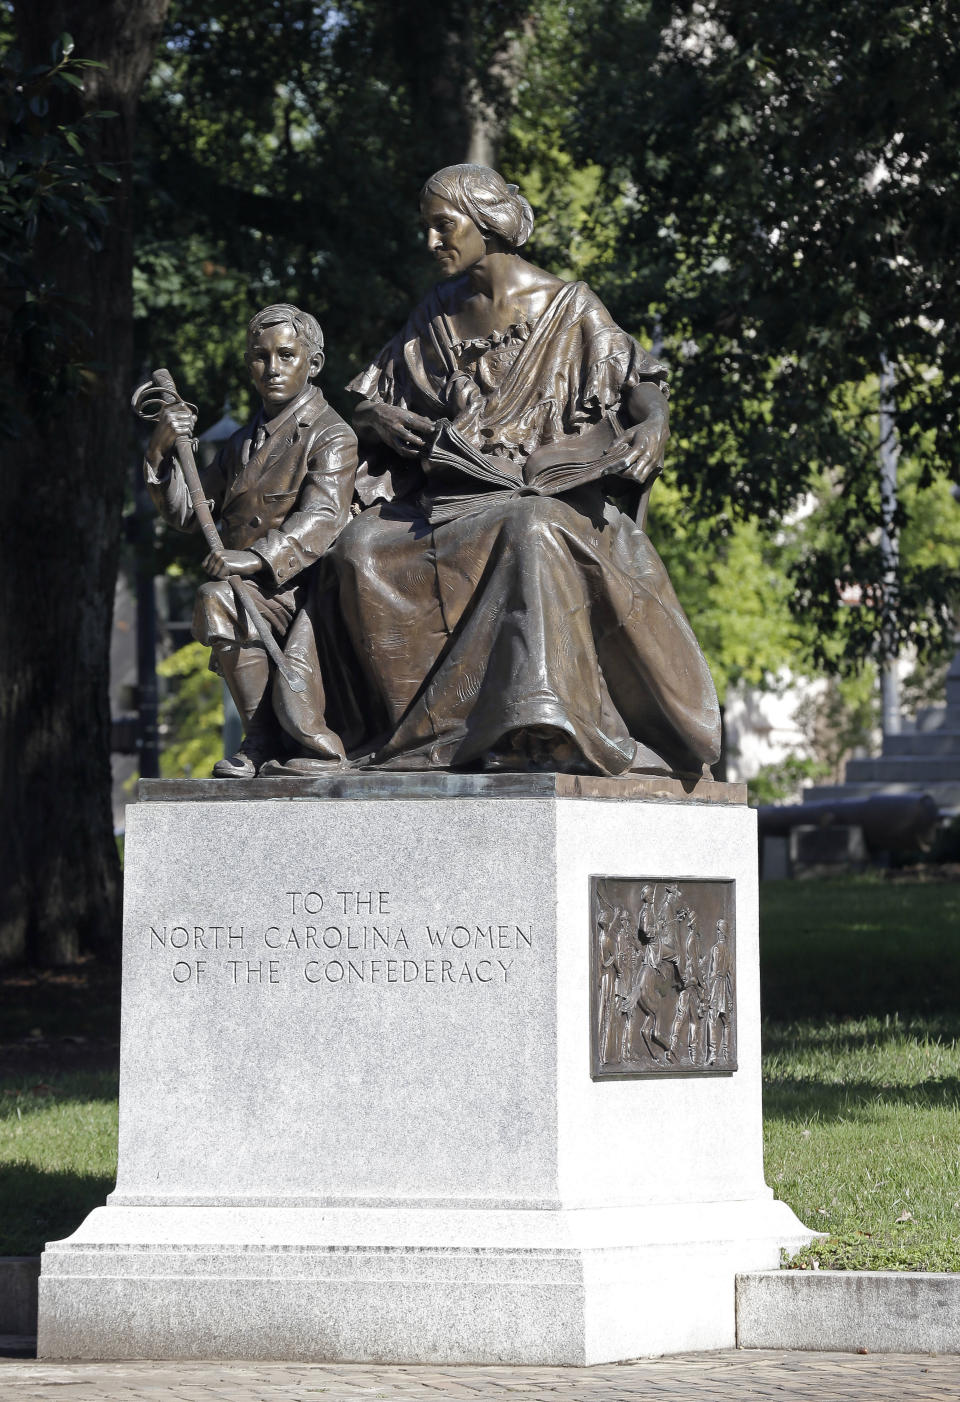 FILE - This Sept. 19, 2017, file photo shows a monument recognizing the North Carolina women of the Confederacy at the state Capitol in Raleigh, N.C. A North Carolina historical commission decided Wednesday, Aug. 22, 2018, that this Confederate monument and two others should remain on the state Capitol grounds with newly added context about slavery, weighing in less than two days after another rebel statue was torn down by protesters at the state’s flagship university. (AP Photo/Gerry Broome, File)